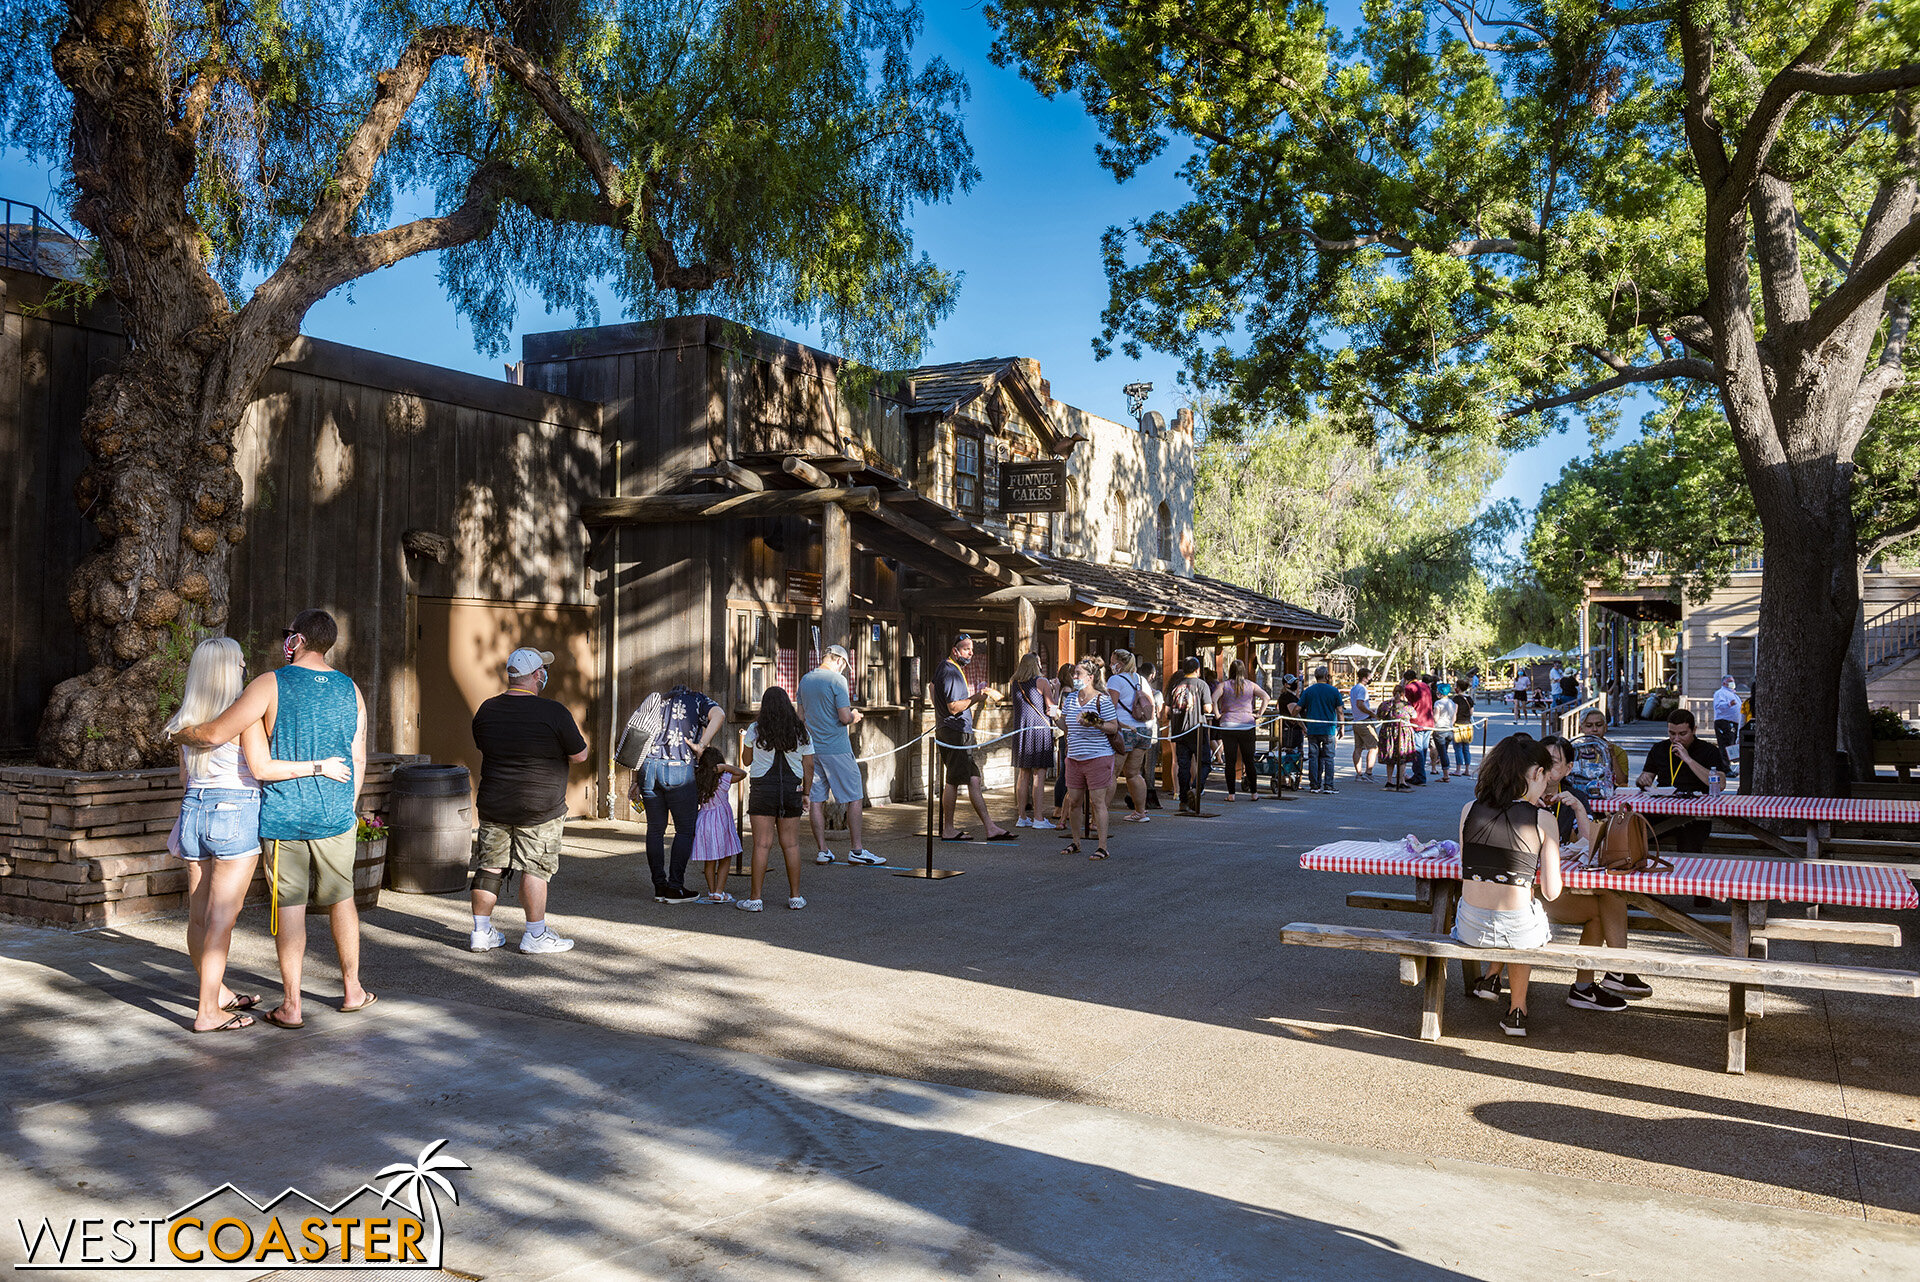  By far the longest line of the park sprawled from Sutter’s Grill. 